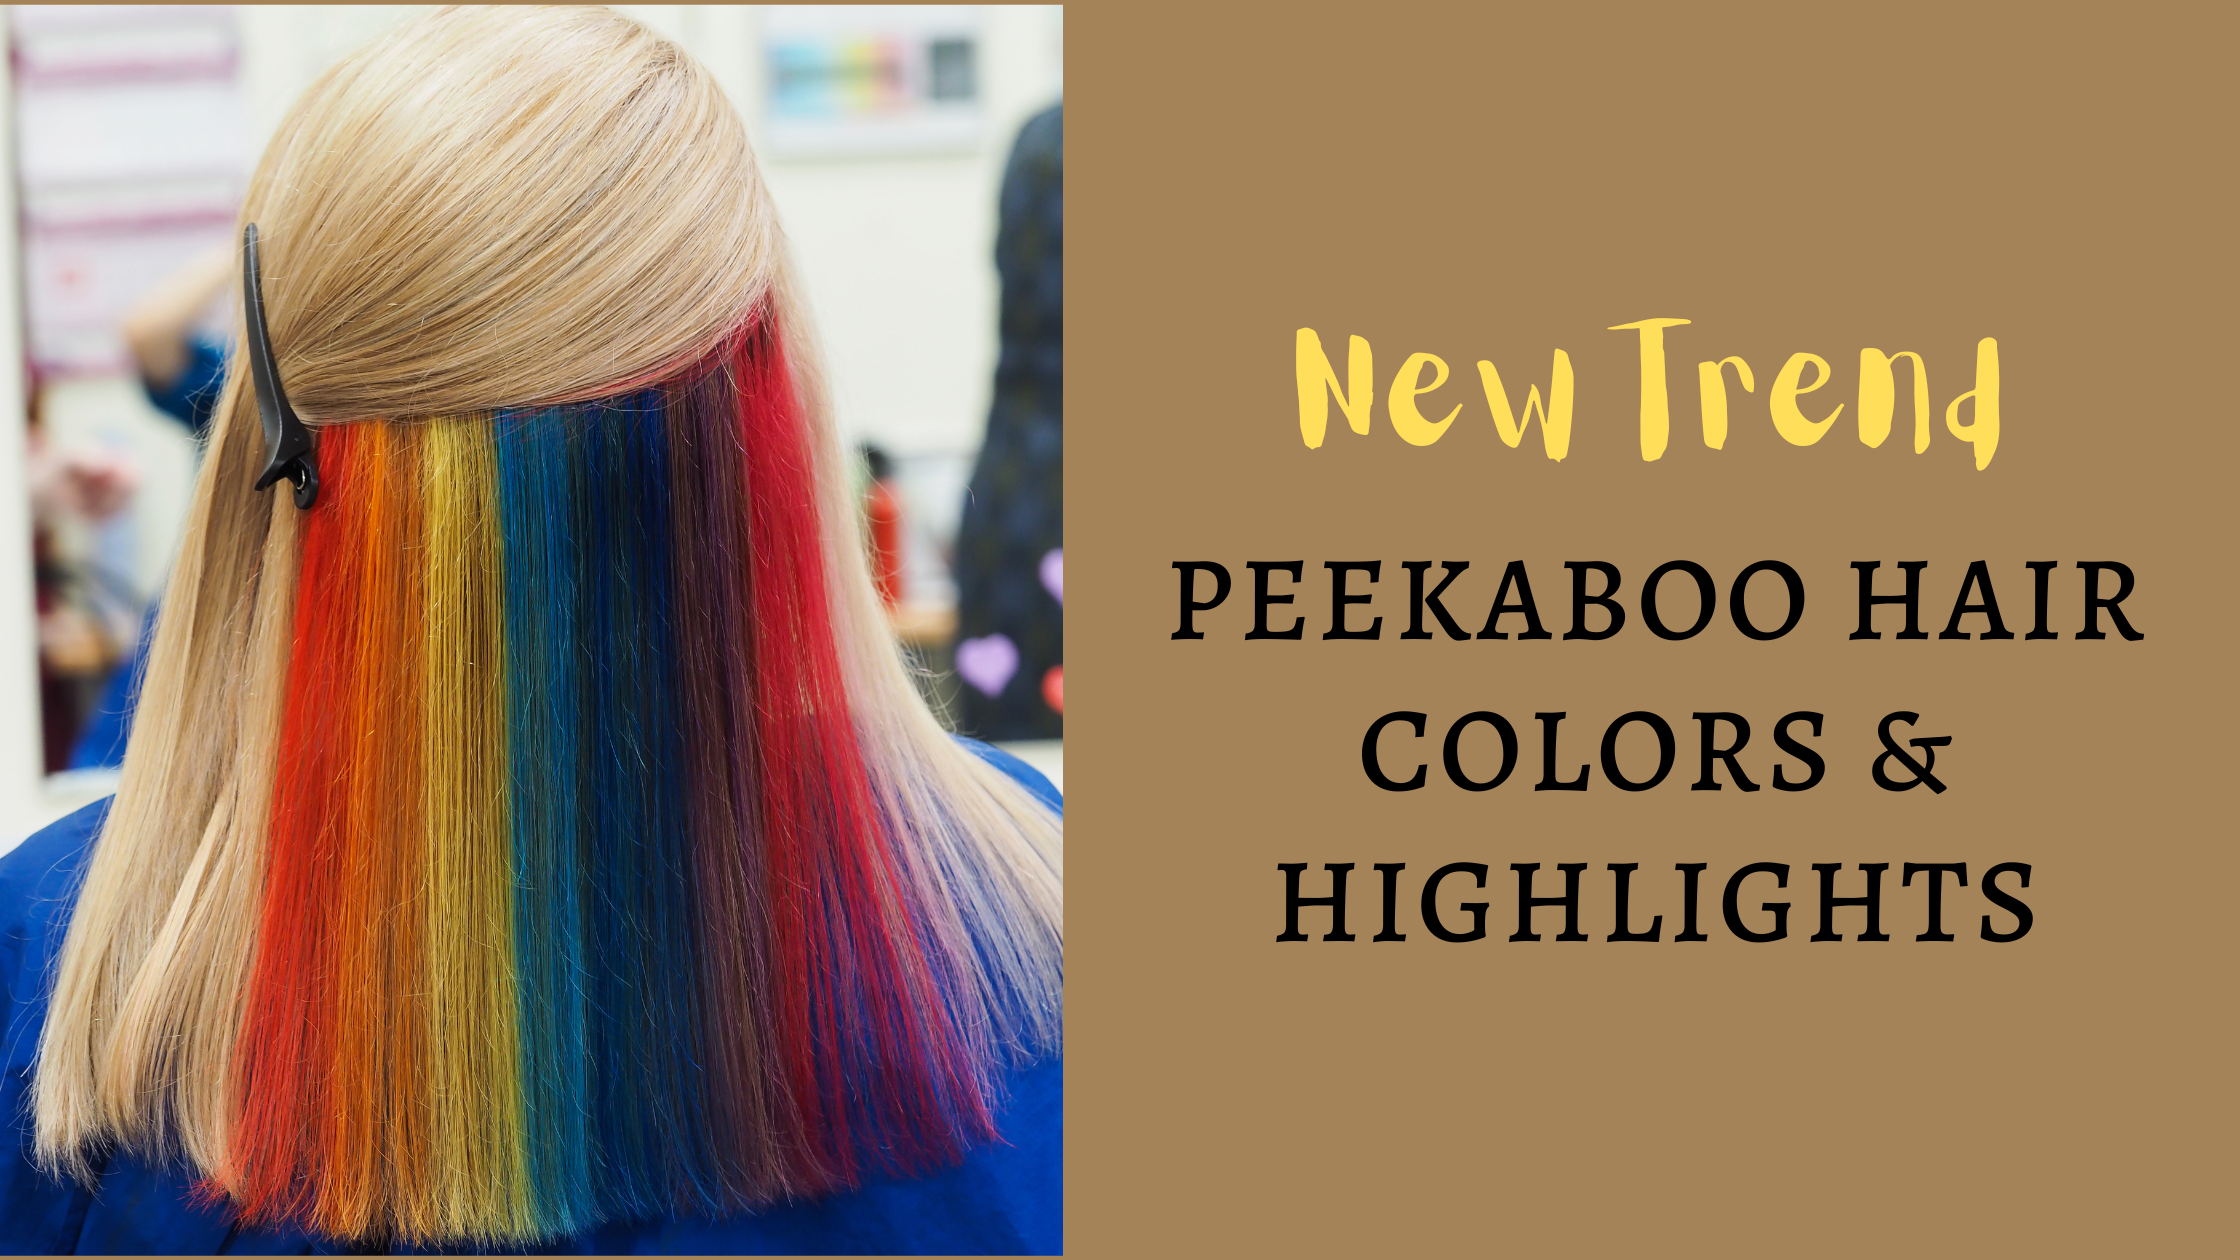 Peekaboo Hair Colors & Highlights Trends that Will Catch Your Attention -  Tikli